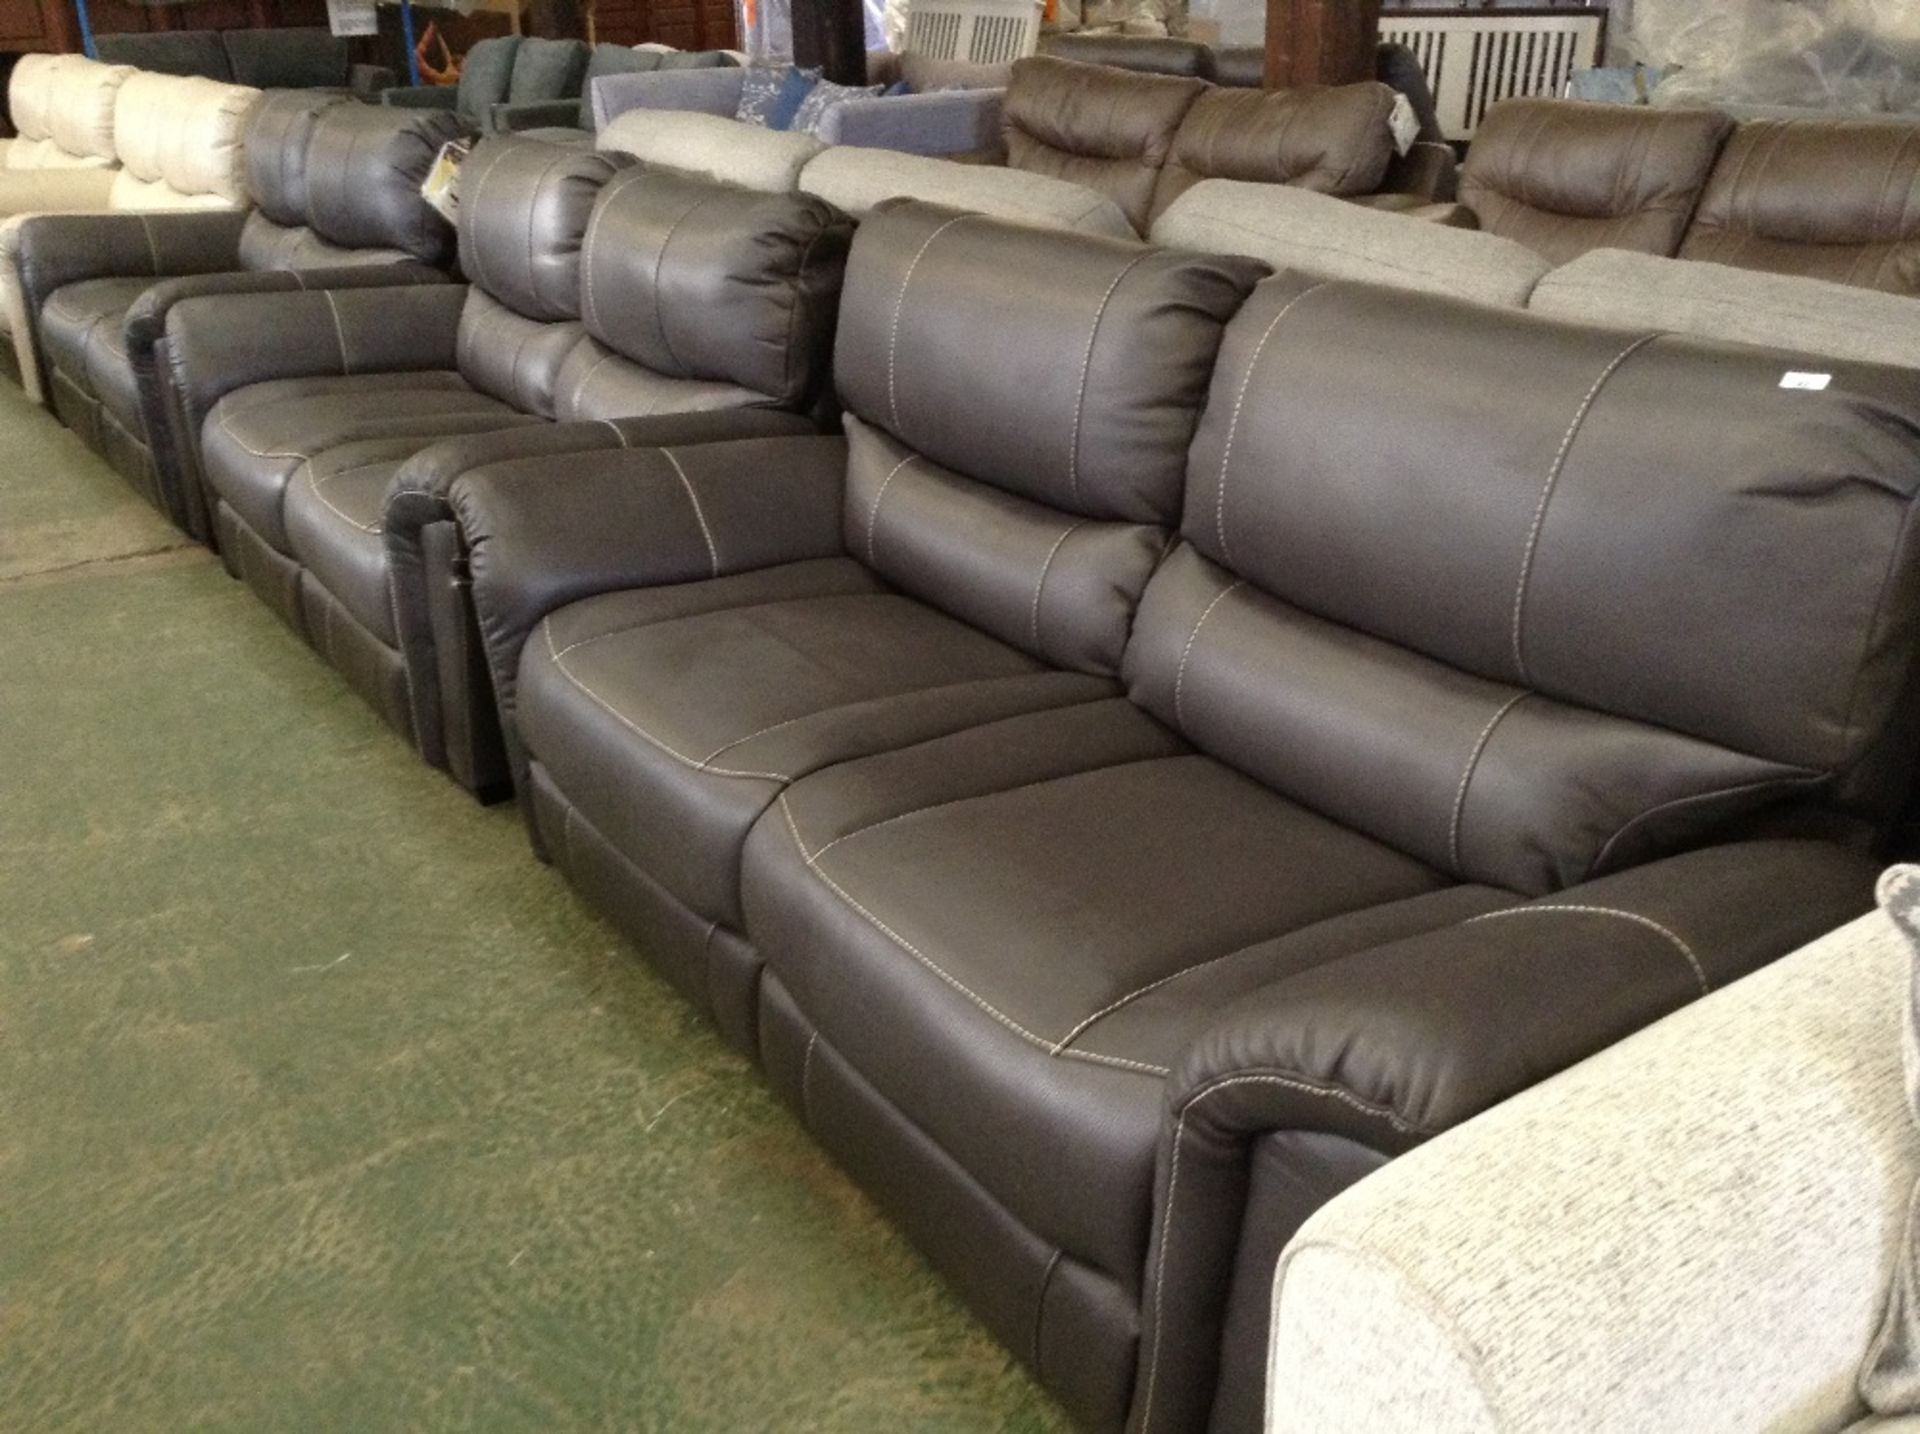 GREY AND BLACK ENDURANCE LEATHER 2 x 2 SEATER SOFA